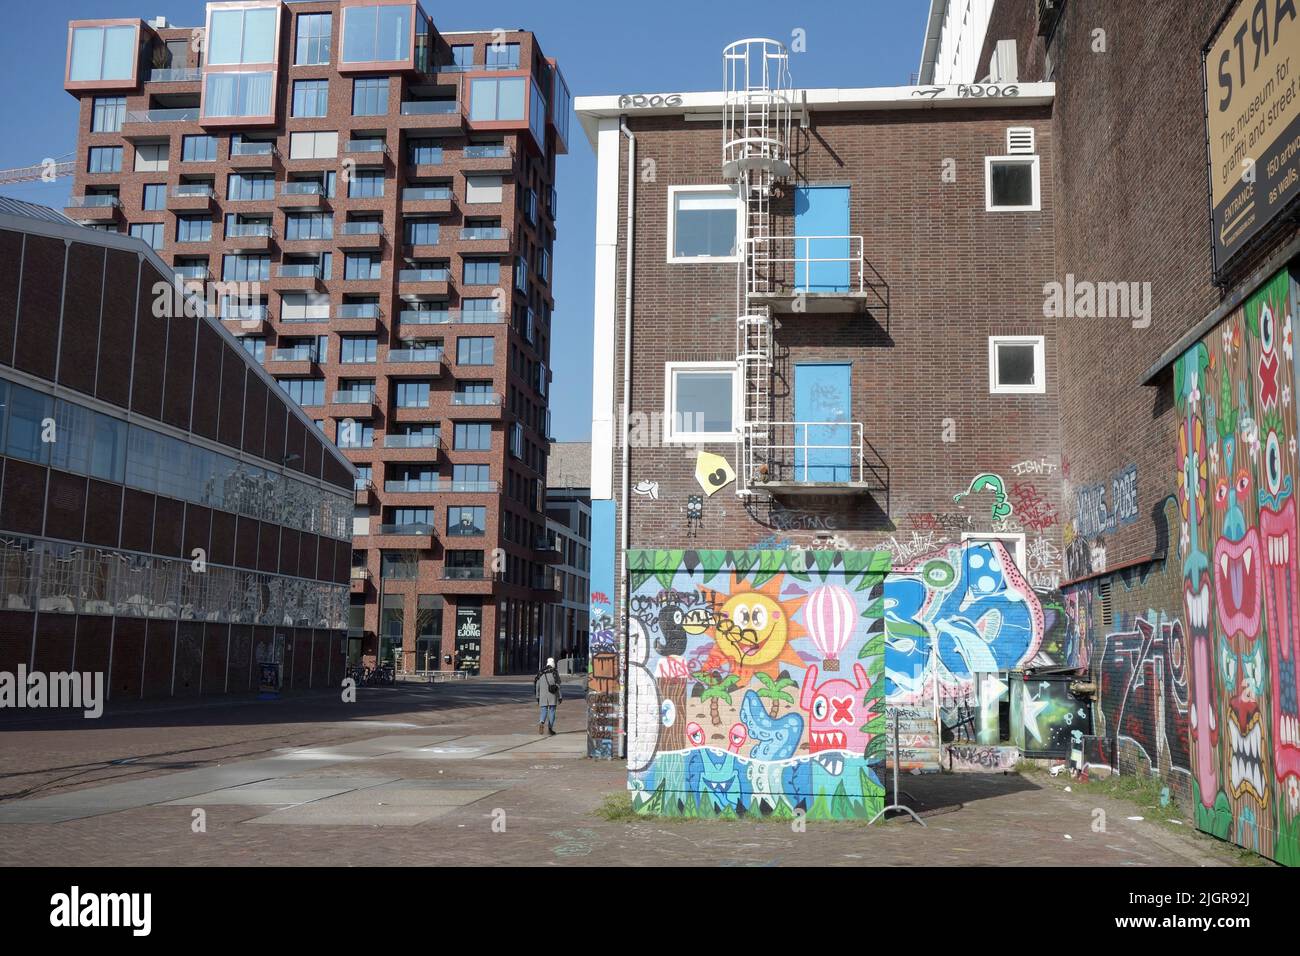 NDSM Amsterdam street scene - a former shipping wharf area in north-west Amsterdam which is used as a space for artists, exhibitions and festivals Stock Photo